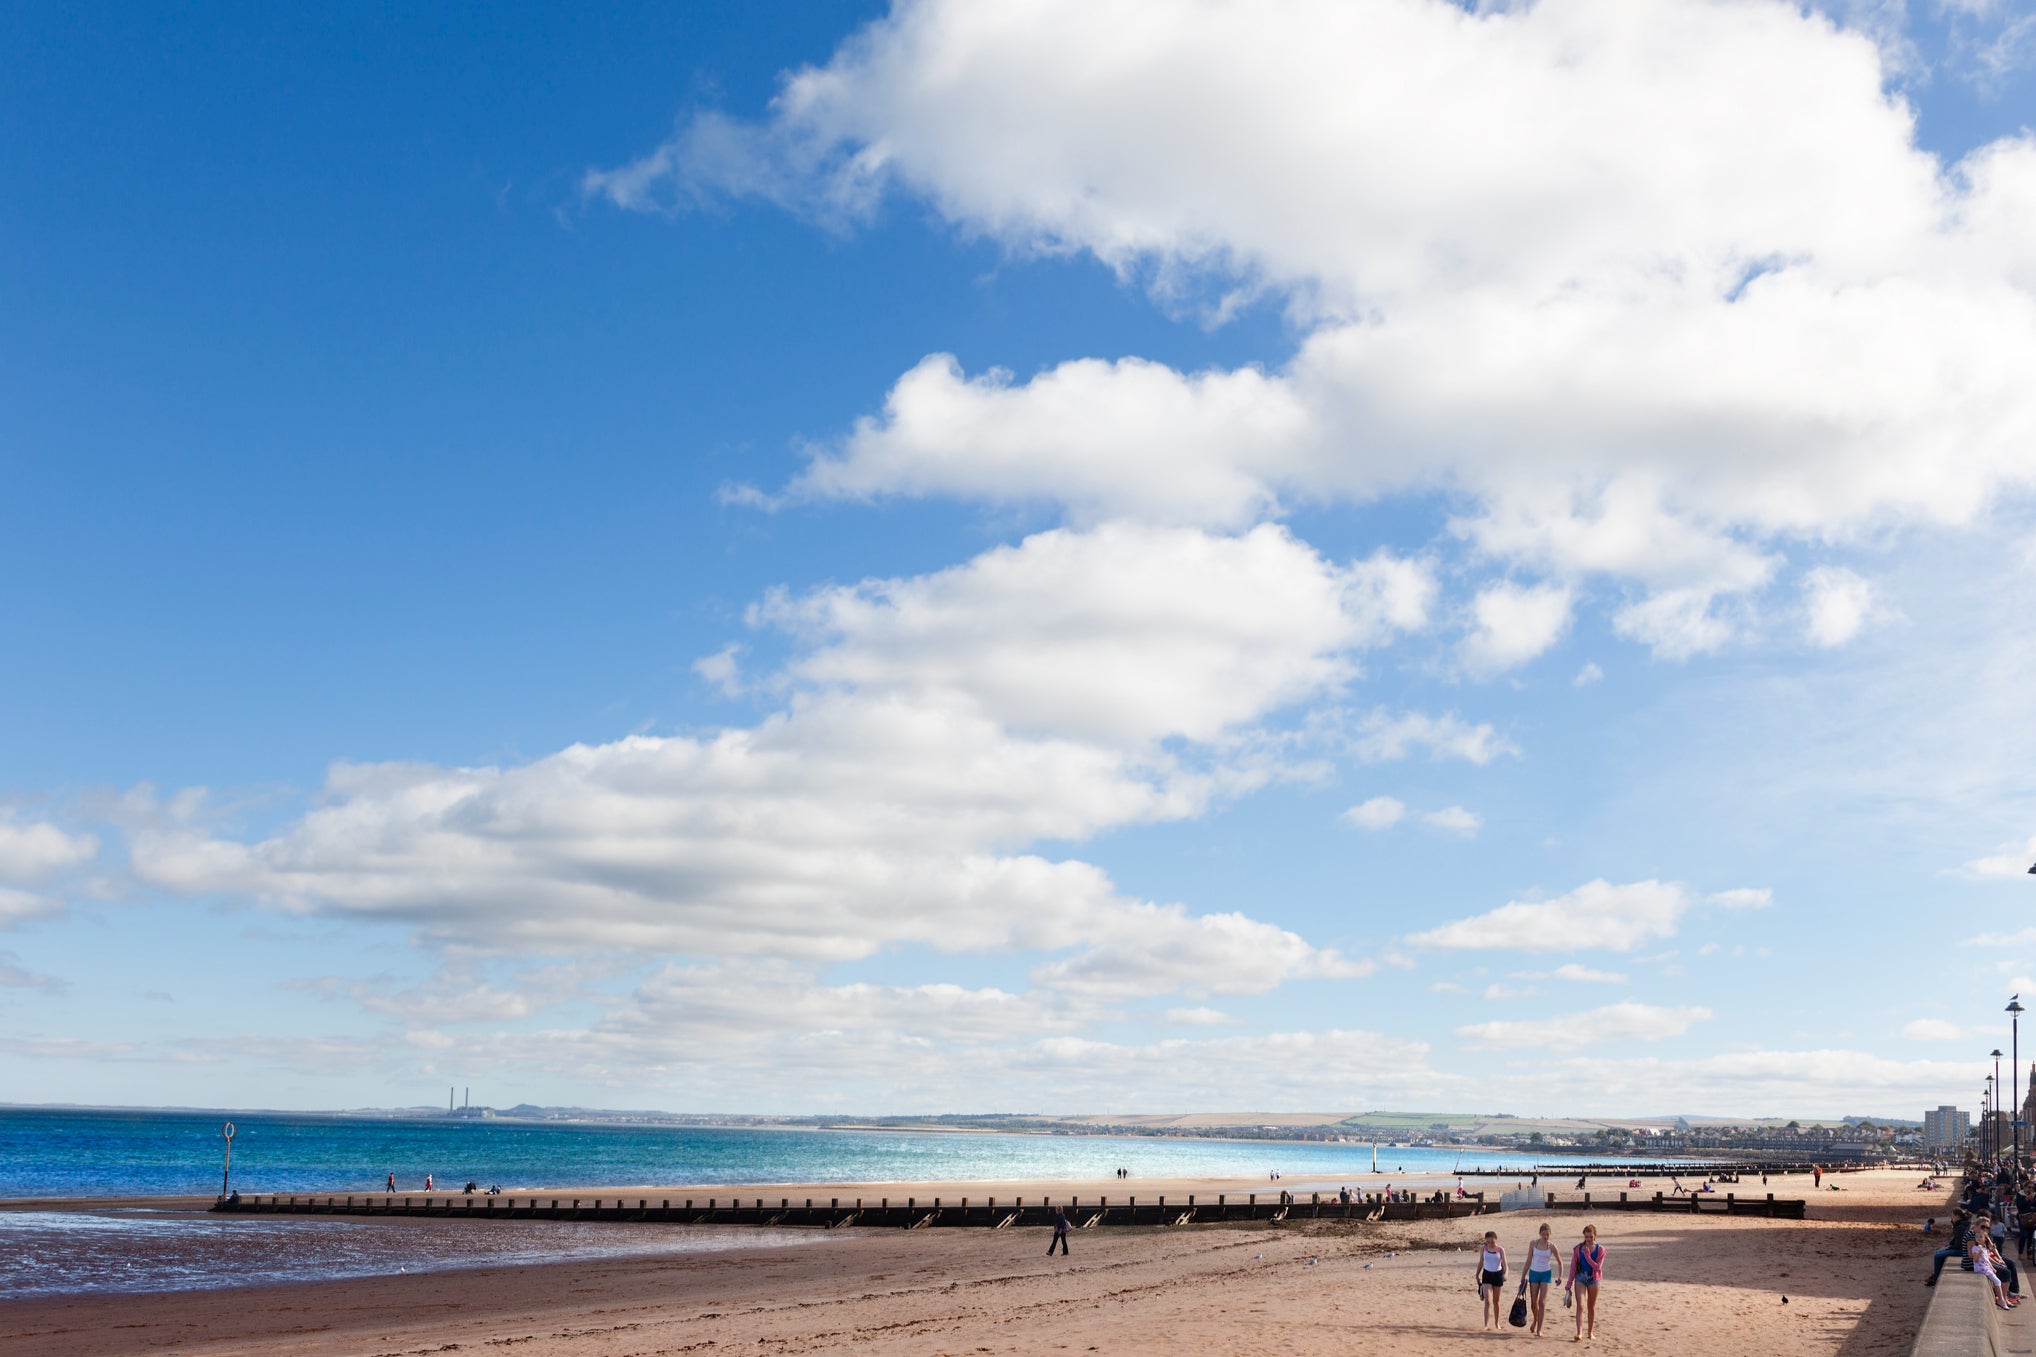 The charm of the coast is just a few miles from Edinburgh’s city centre